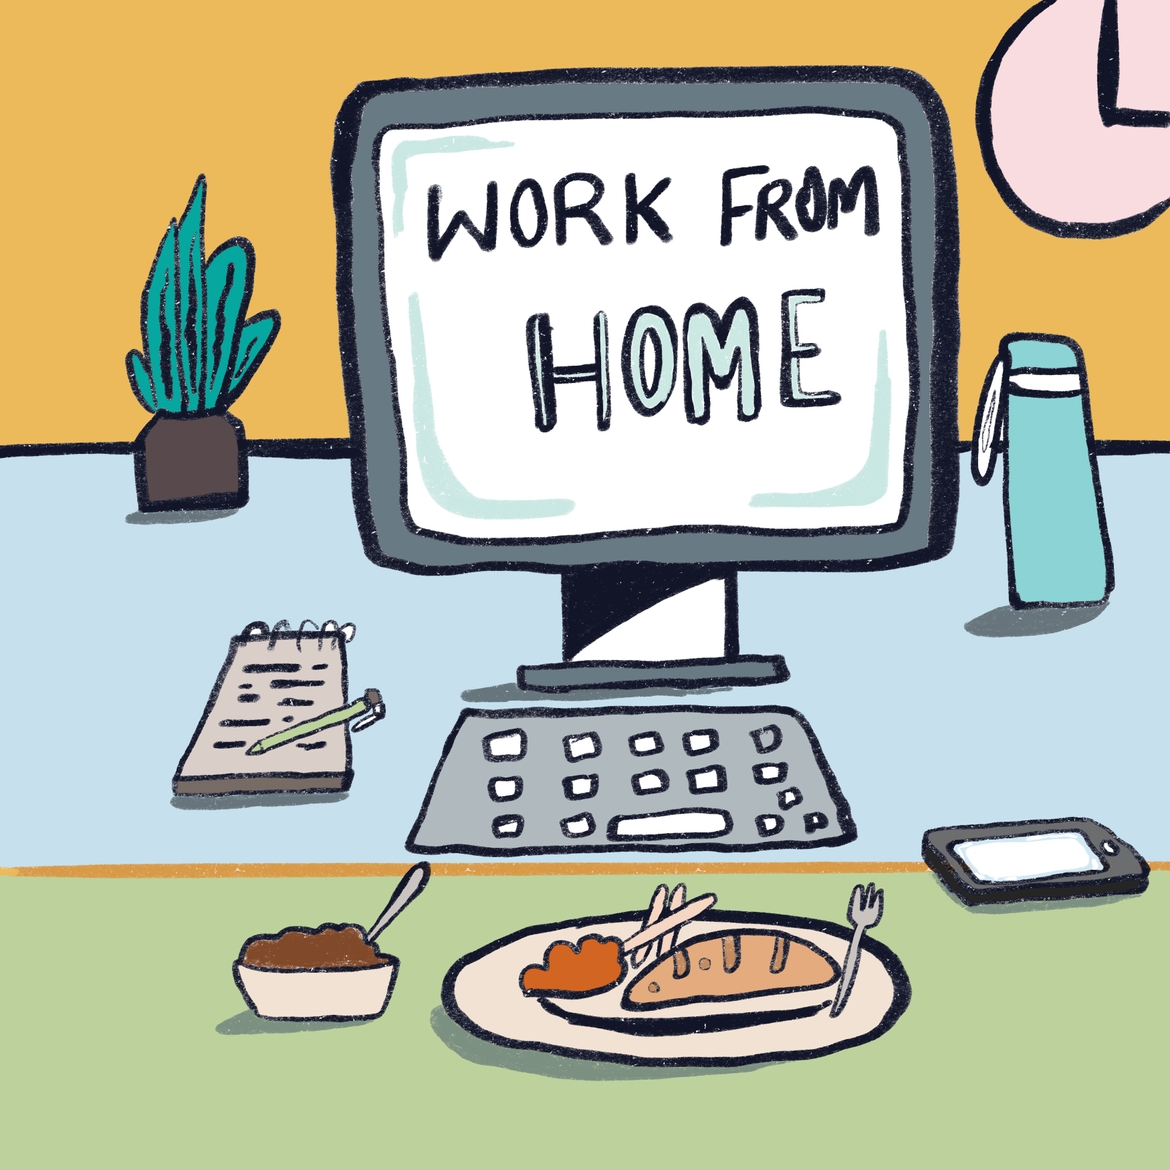 Work From Home is the future. Embrace it.